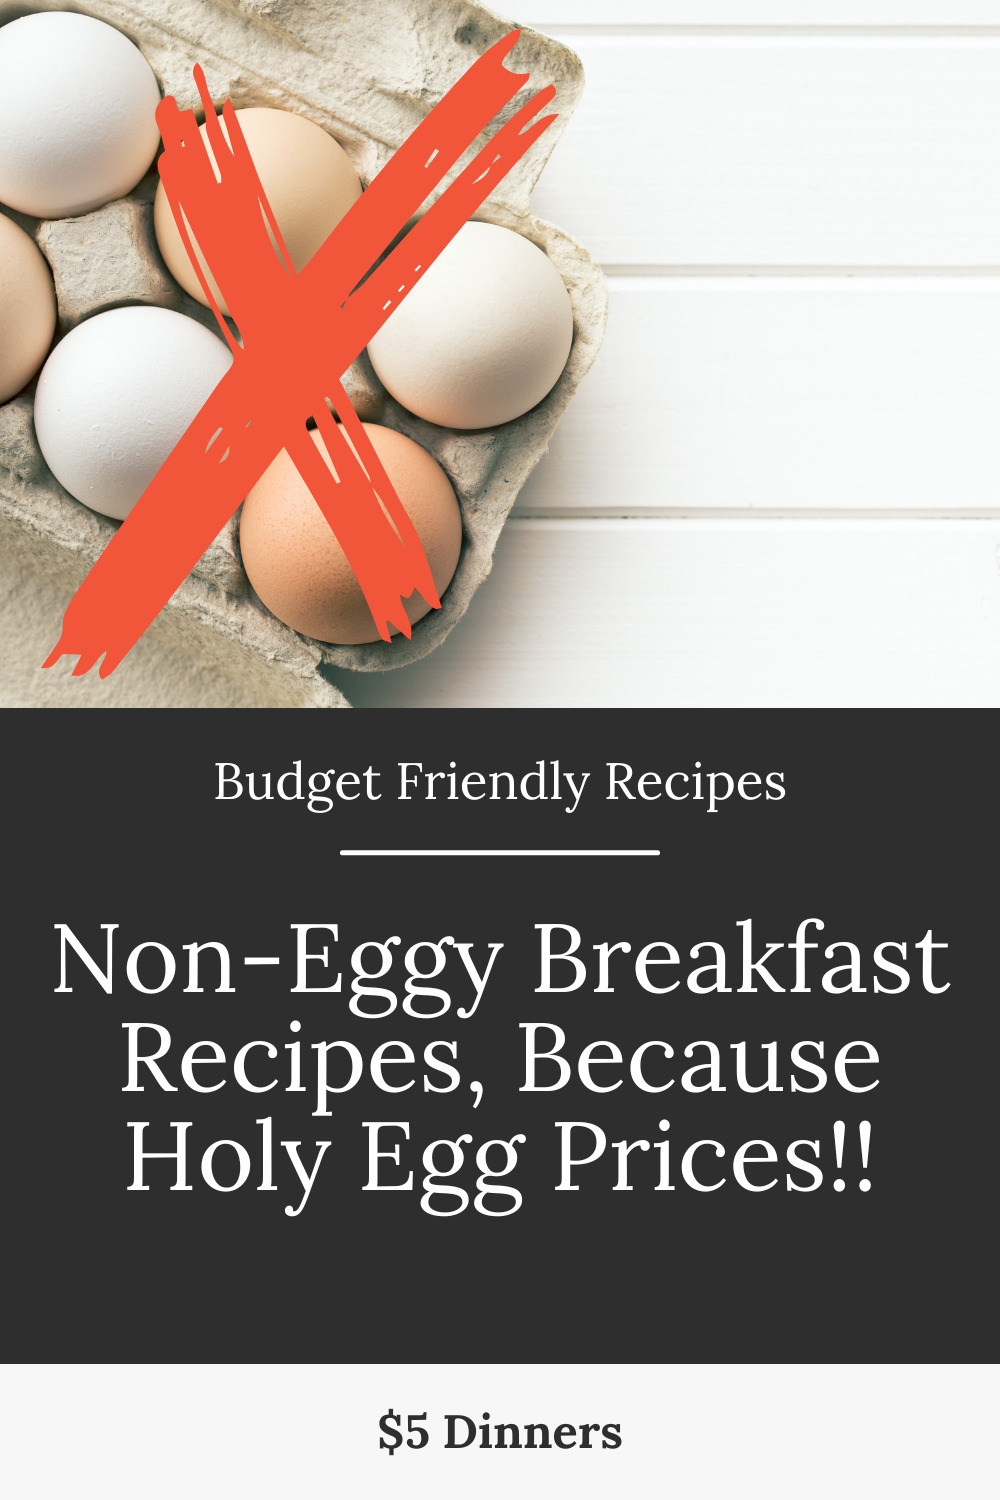 Breakfast recipes without eggs